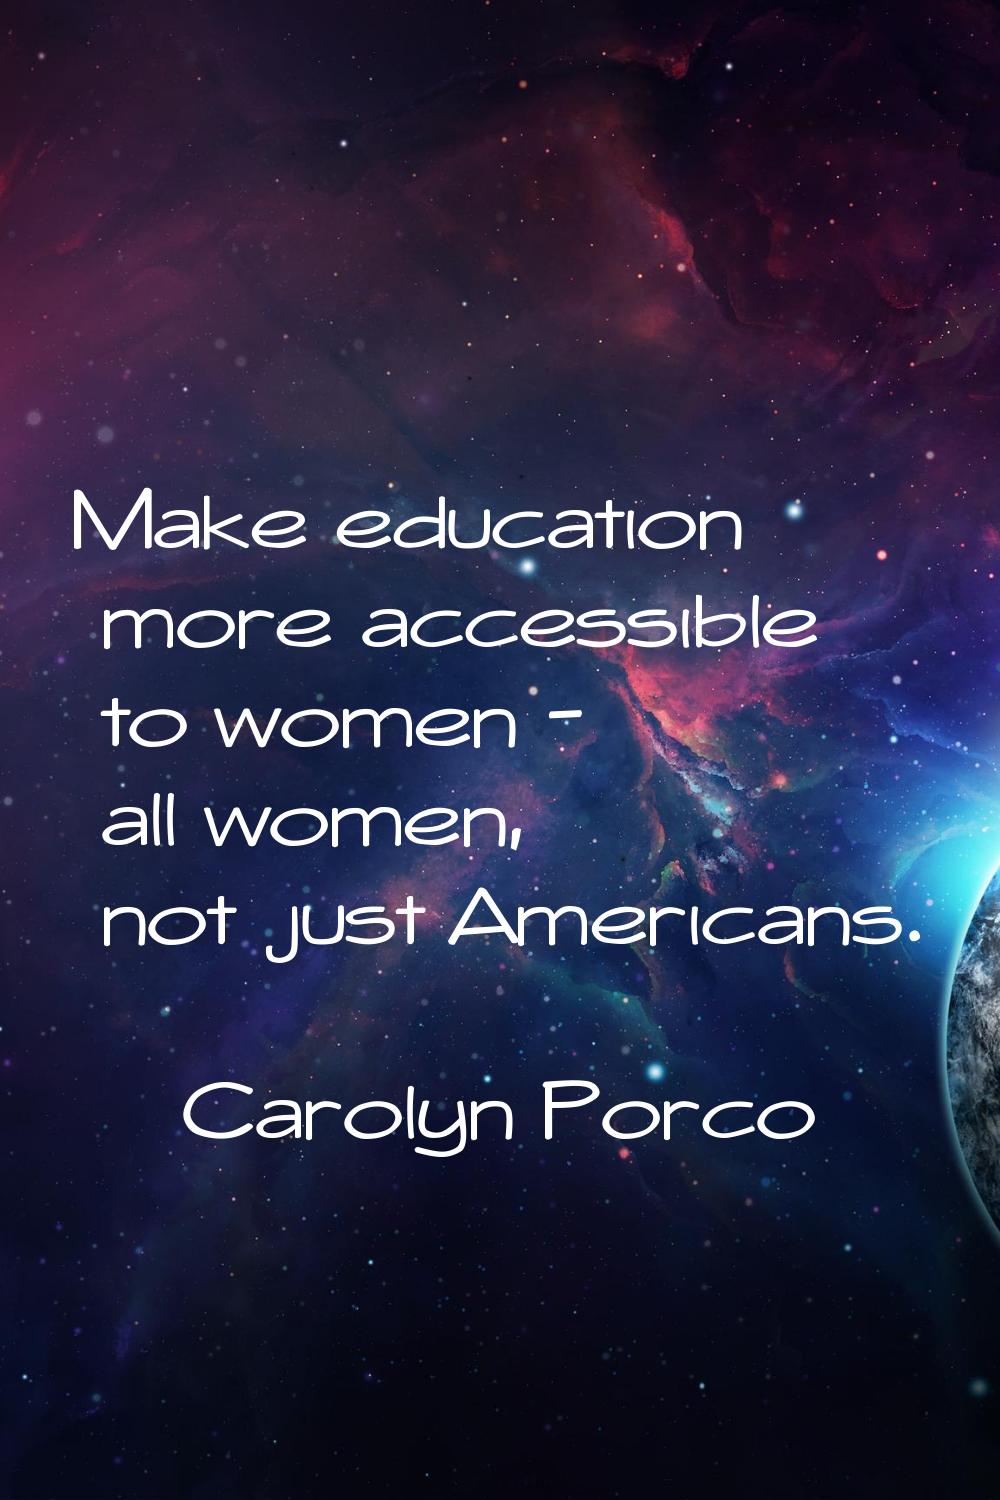 Make education more accessible to women - all women, not just Americans.